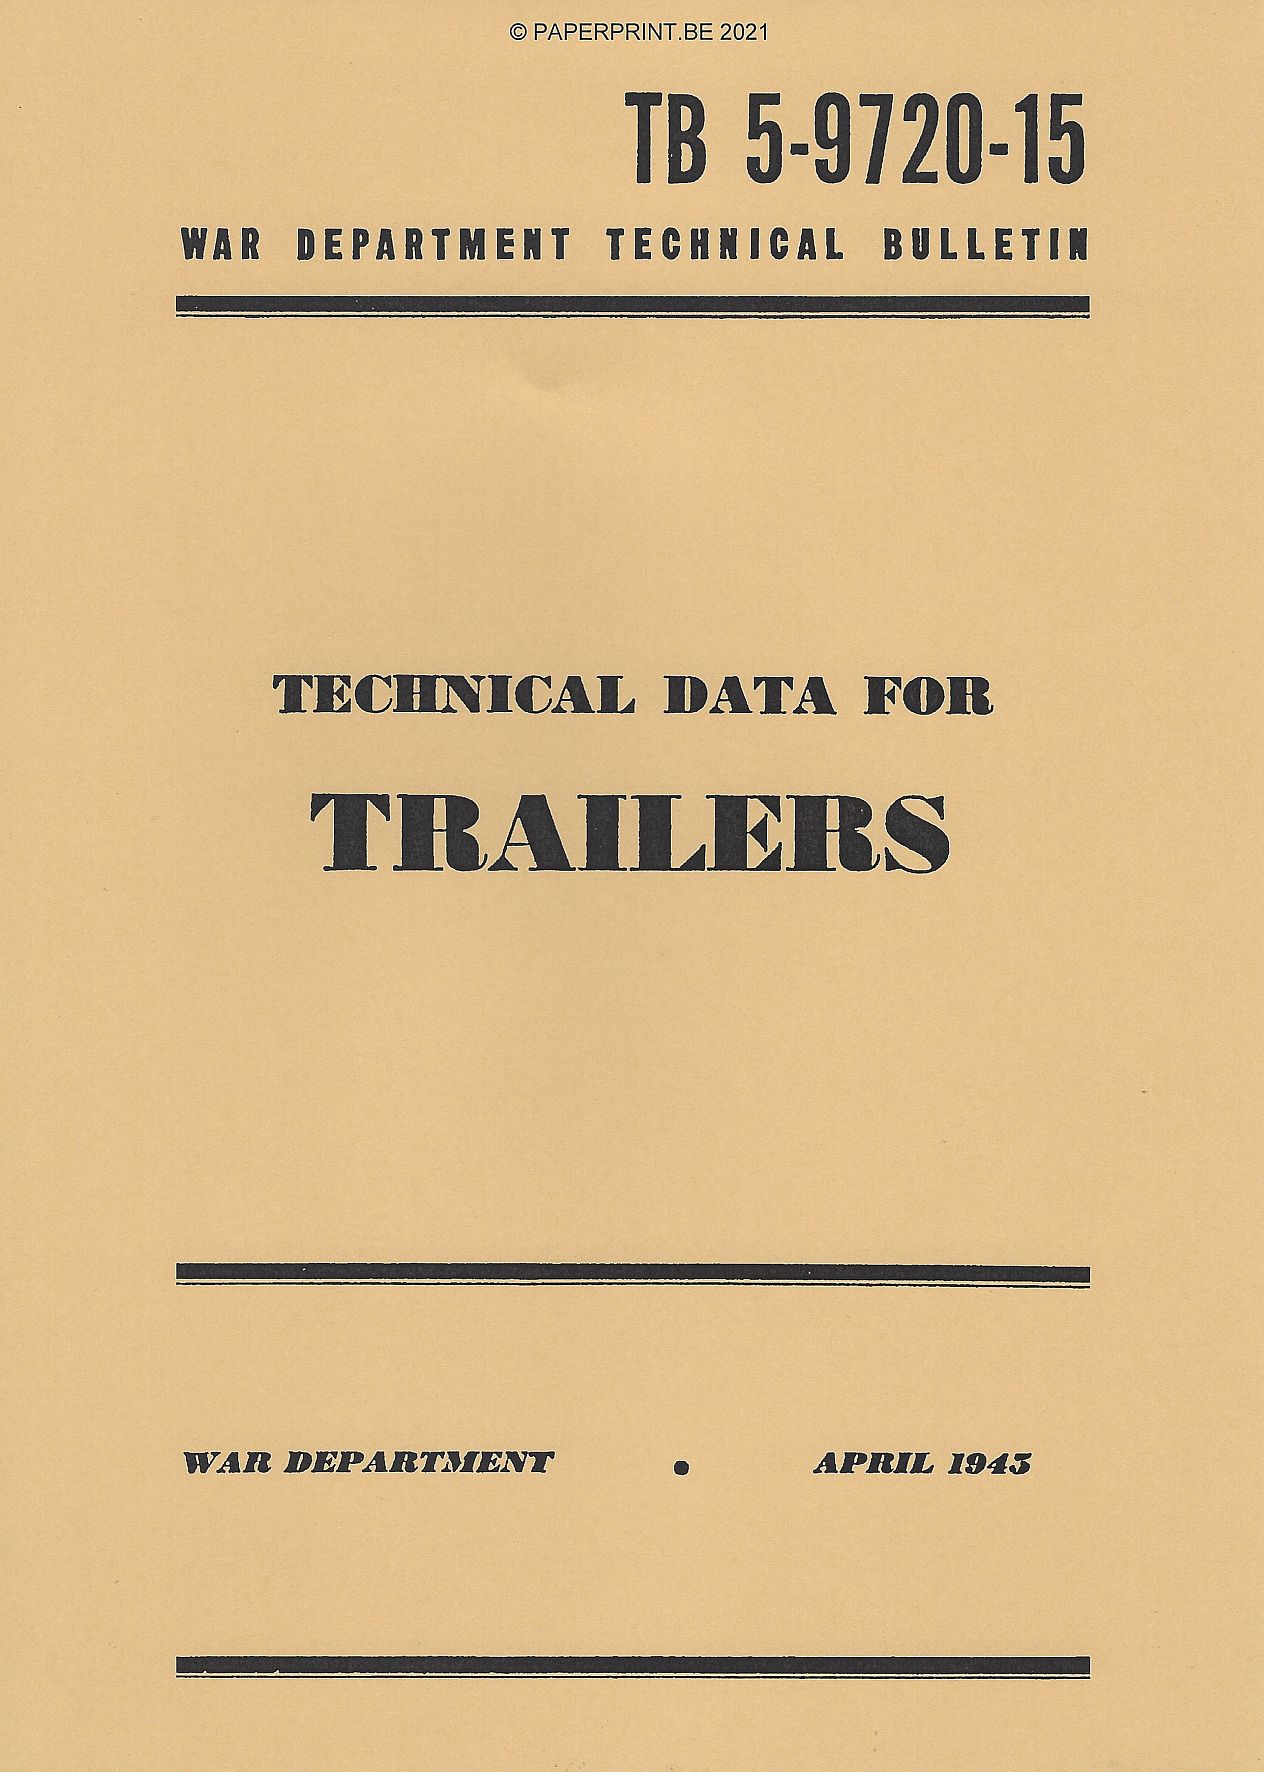 TB 5-9720-15 US TECHNICAL DATA FOR TRAILERS